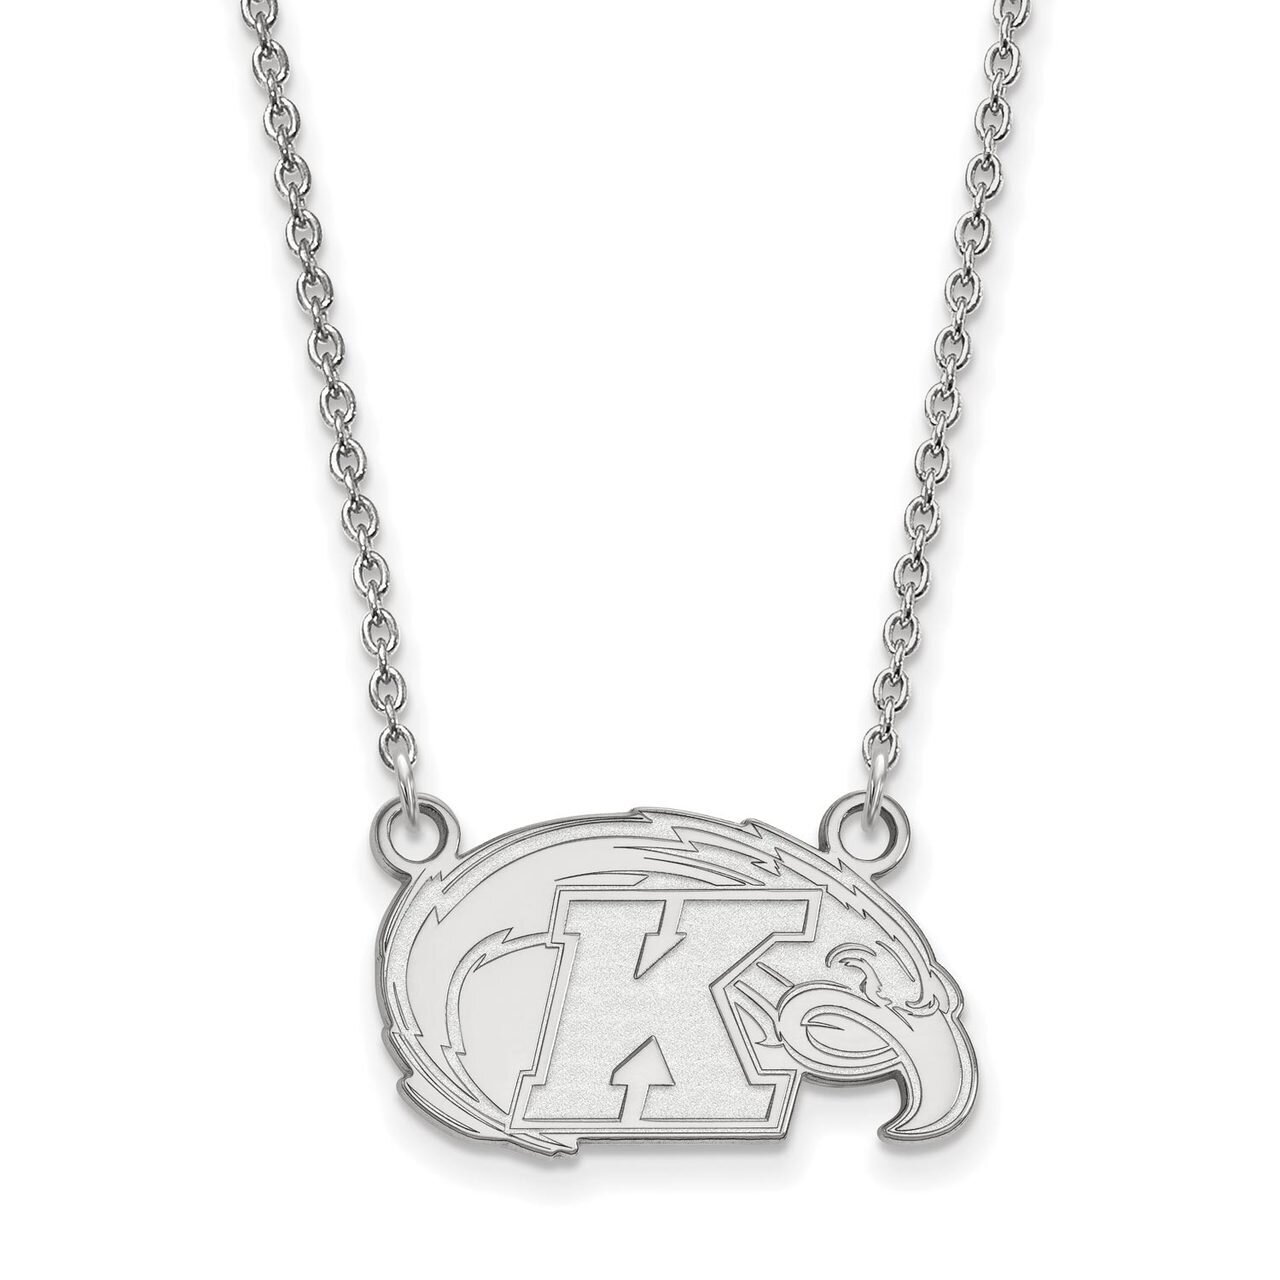 Kent State University Small Pendant with Chain Necklace 14k White Gold 4W008KEN-18